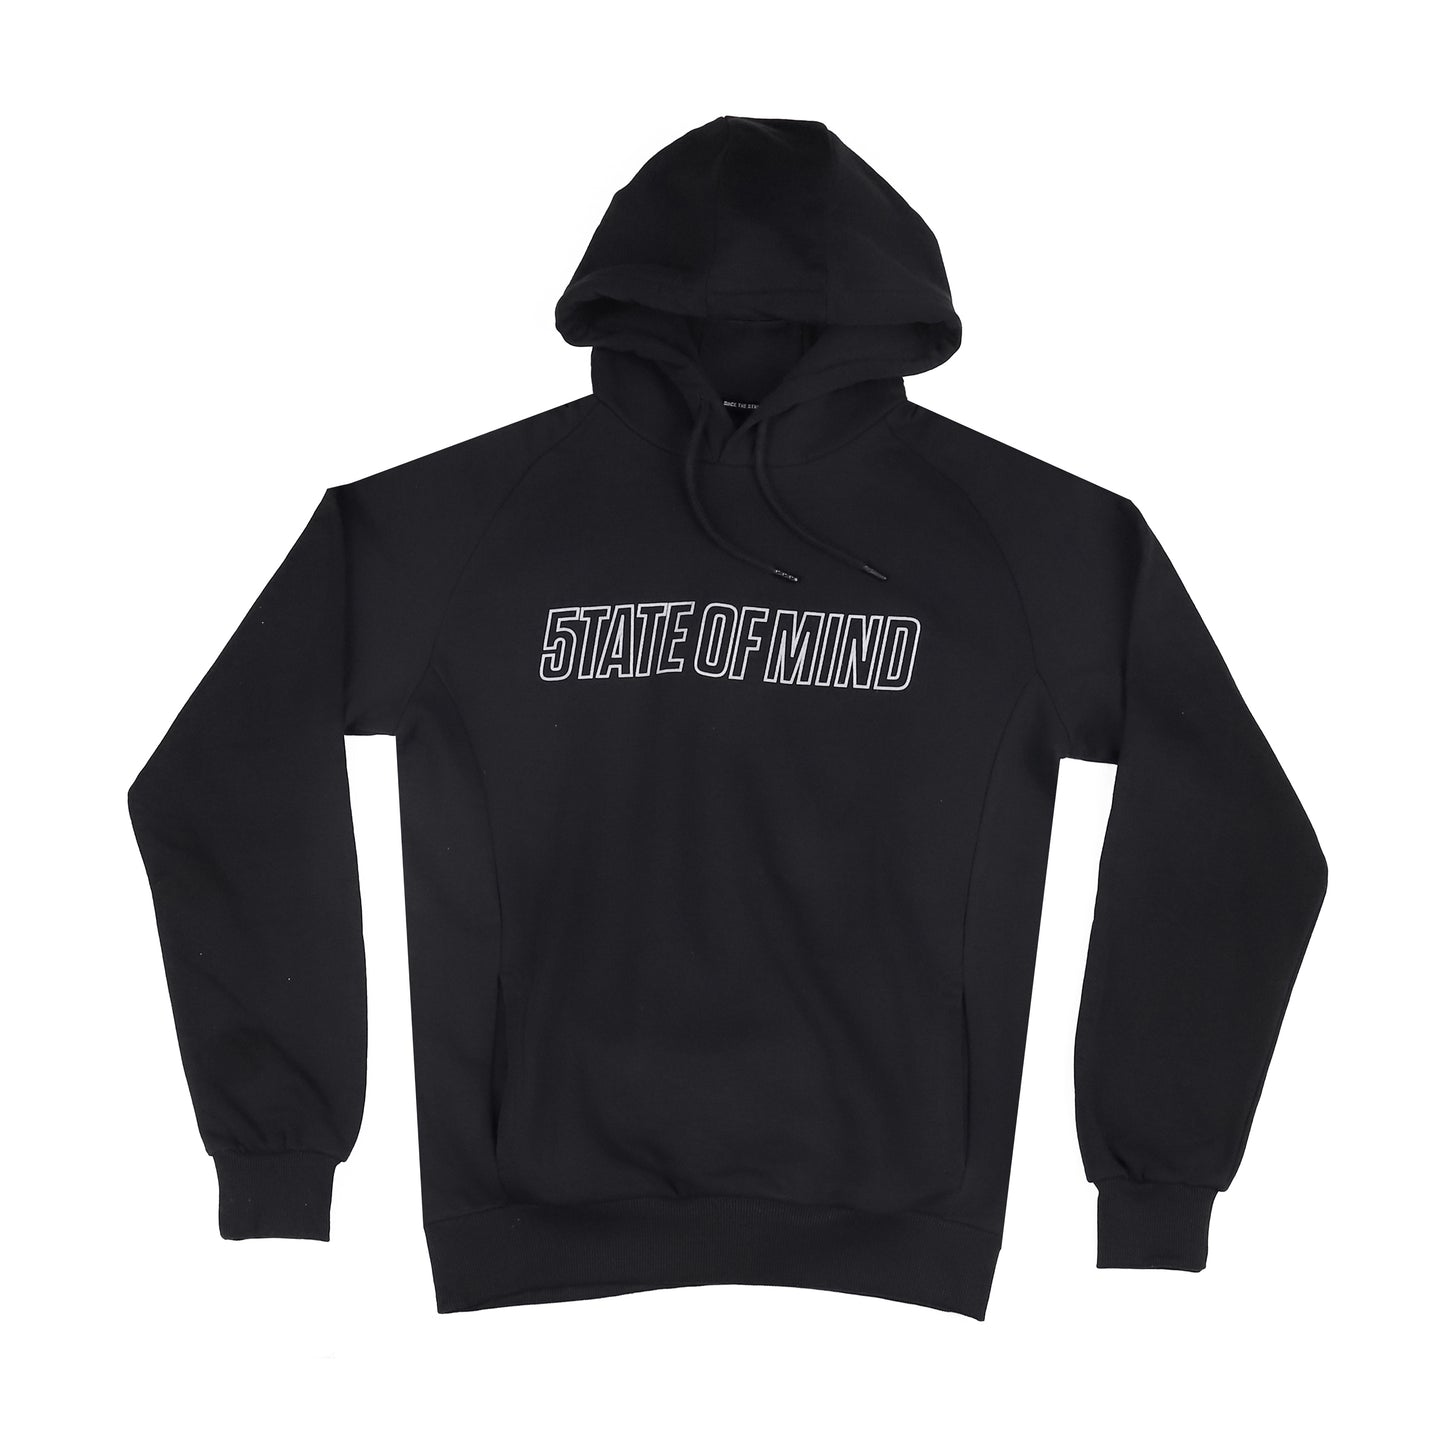 "SINCE THE STREETS" black reflective hoodie